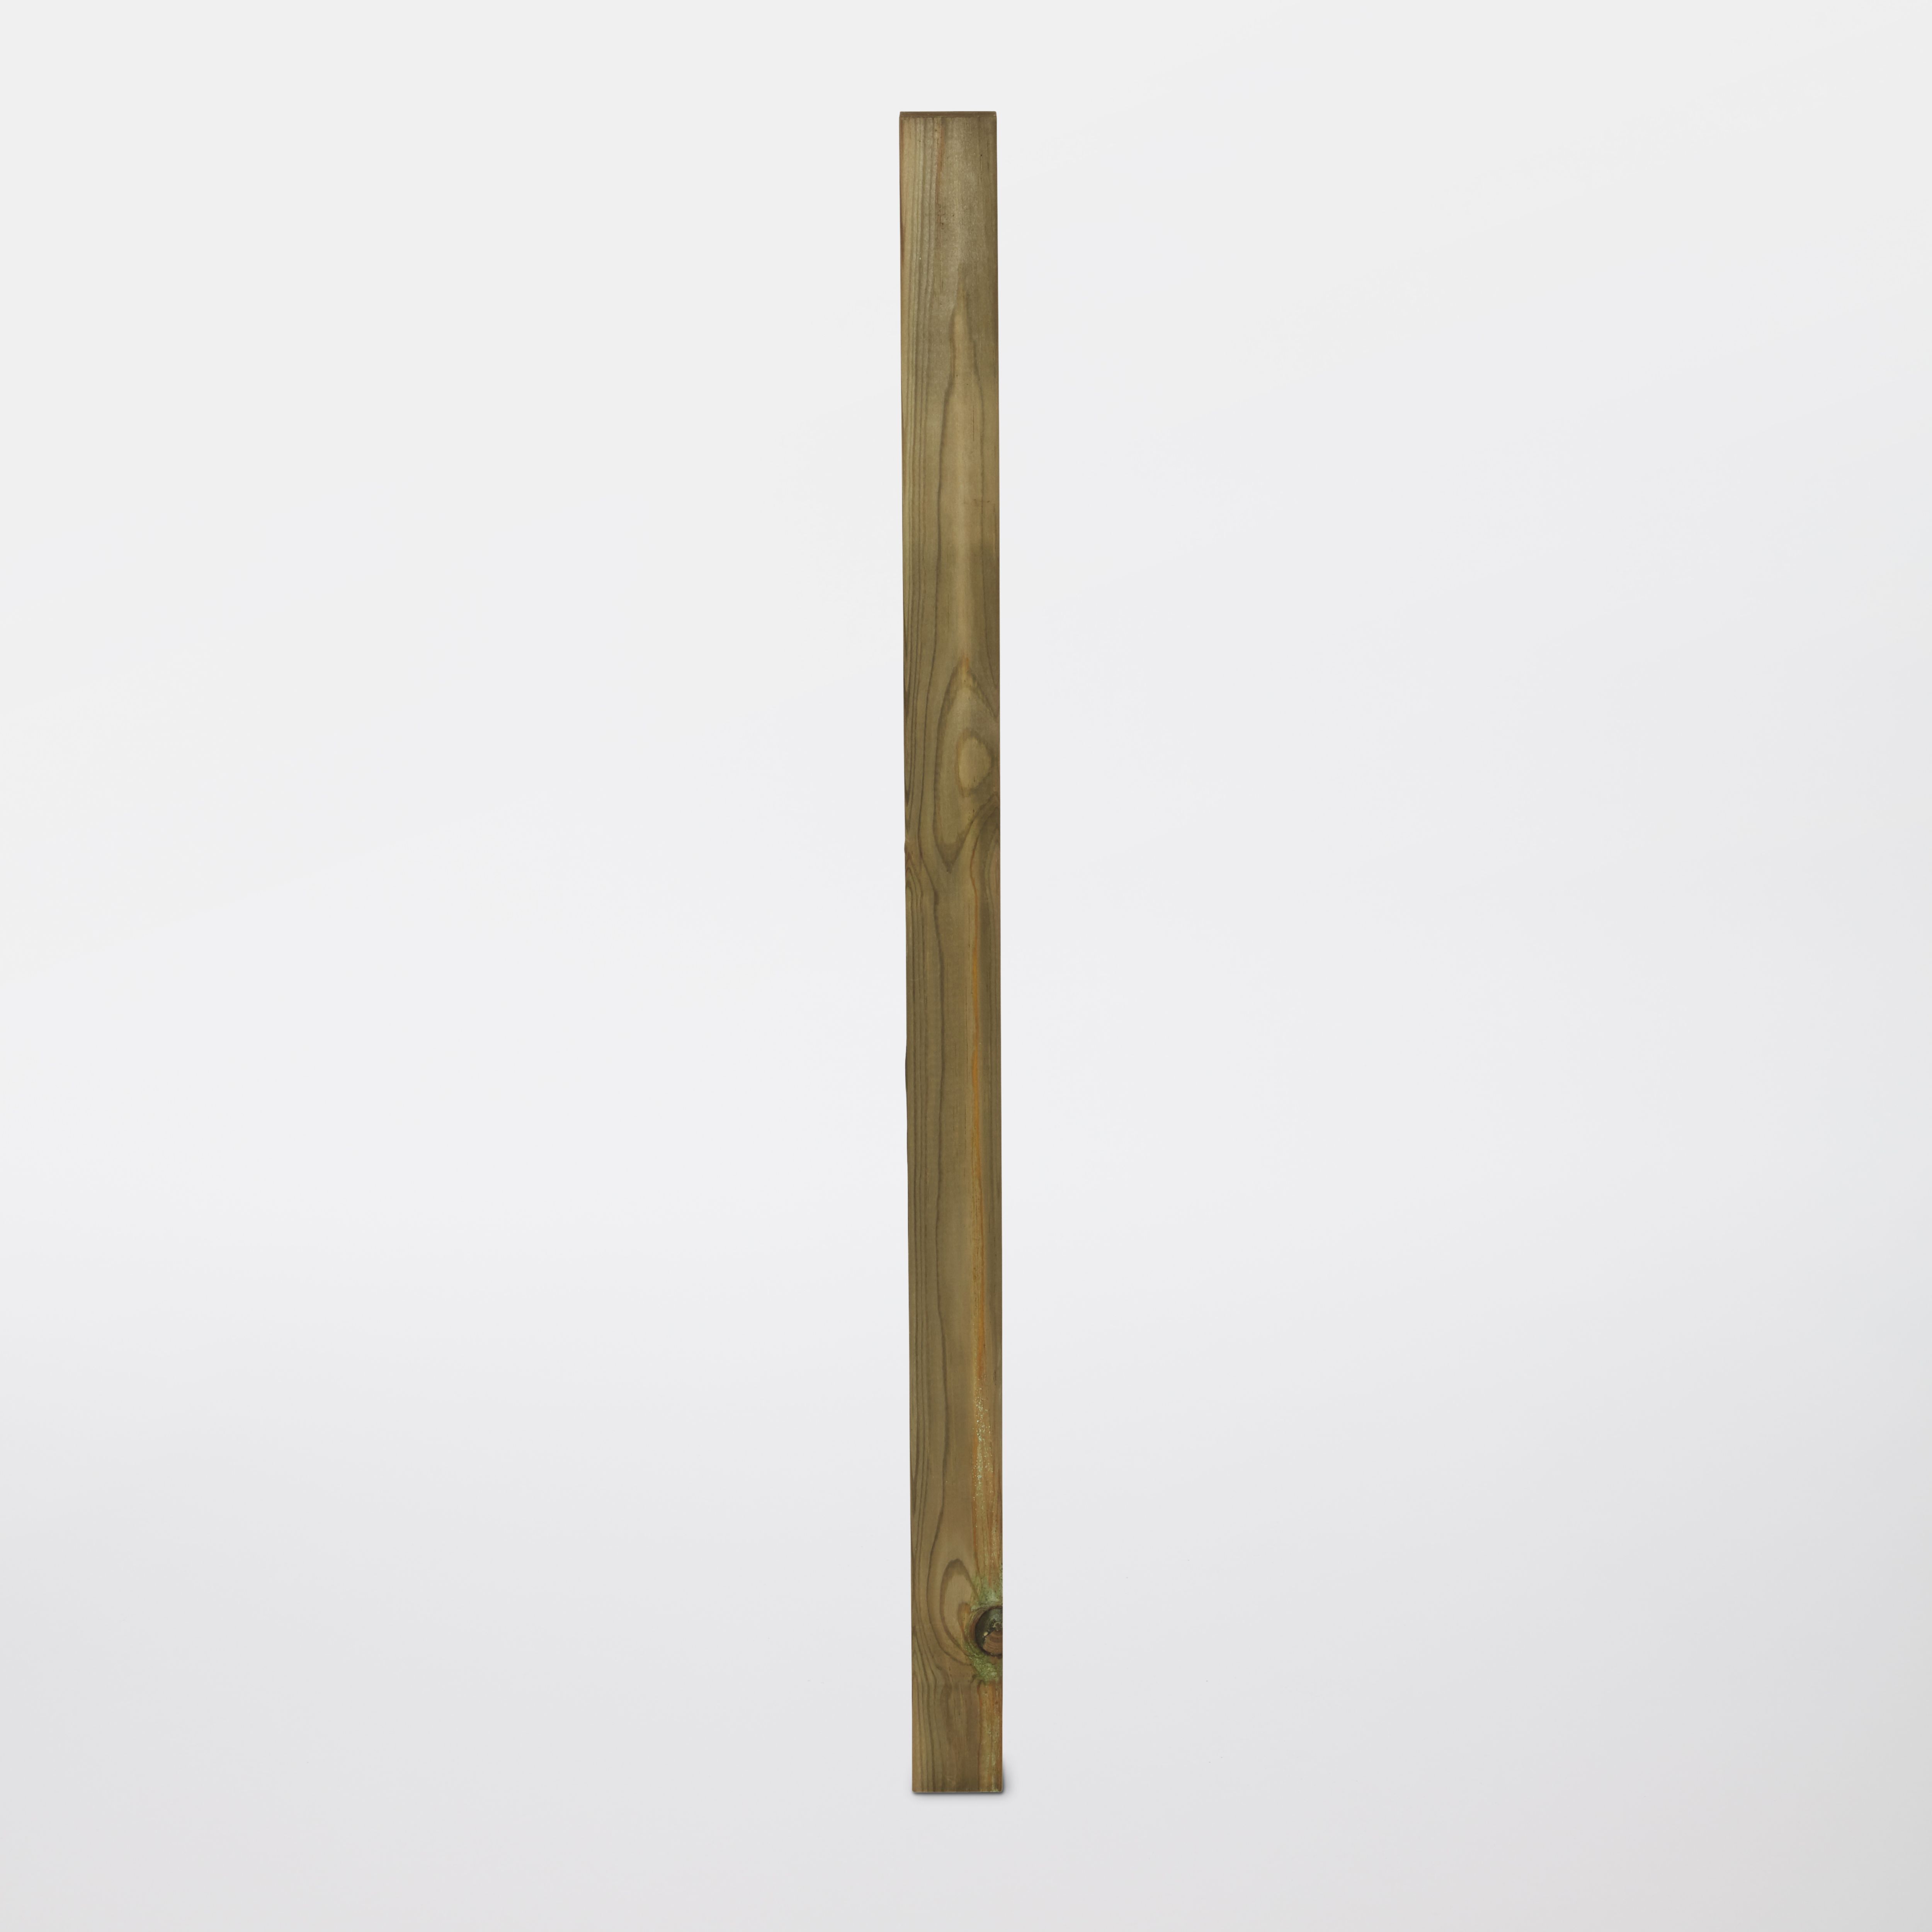 Klikstrom UC4 Natural Square Wooden Fence post (H)0.8m (W)45mm